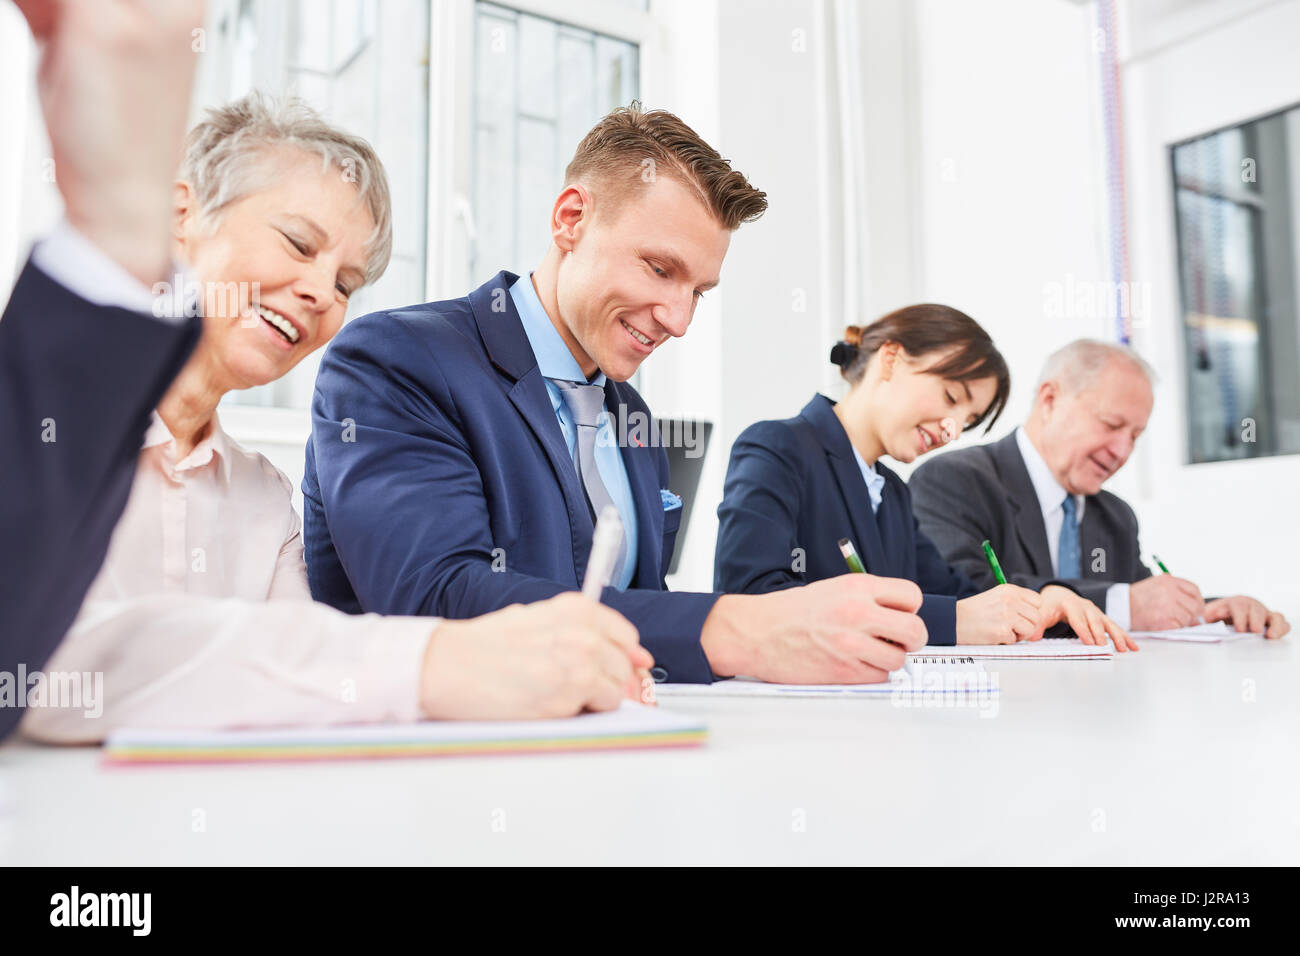 Employee staff in training taking qualification test in assessment center Stock Photo